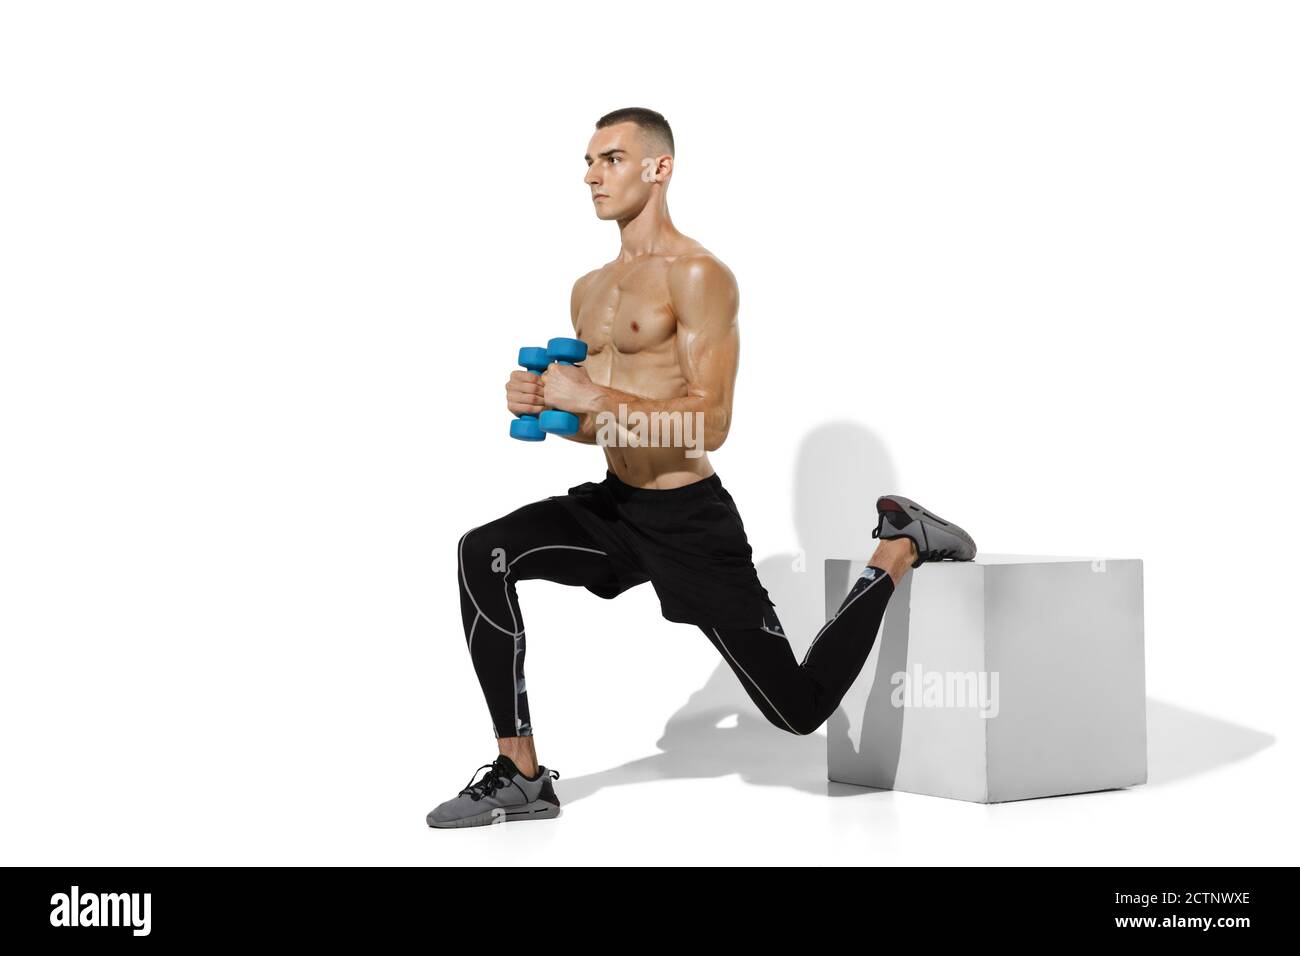 Jumpbox. Stylish young male athlete practicing on white studio background, portrait with shadows. Sportive fit model in works out in motion and action. Body building, healthy lifestyle, style concept. Stock Photo